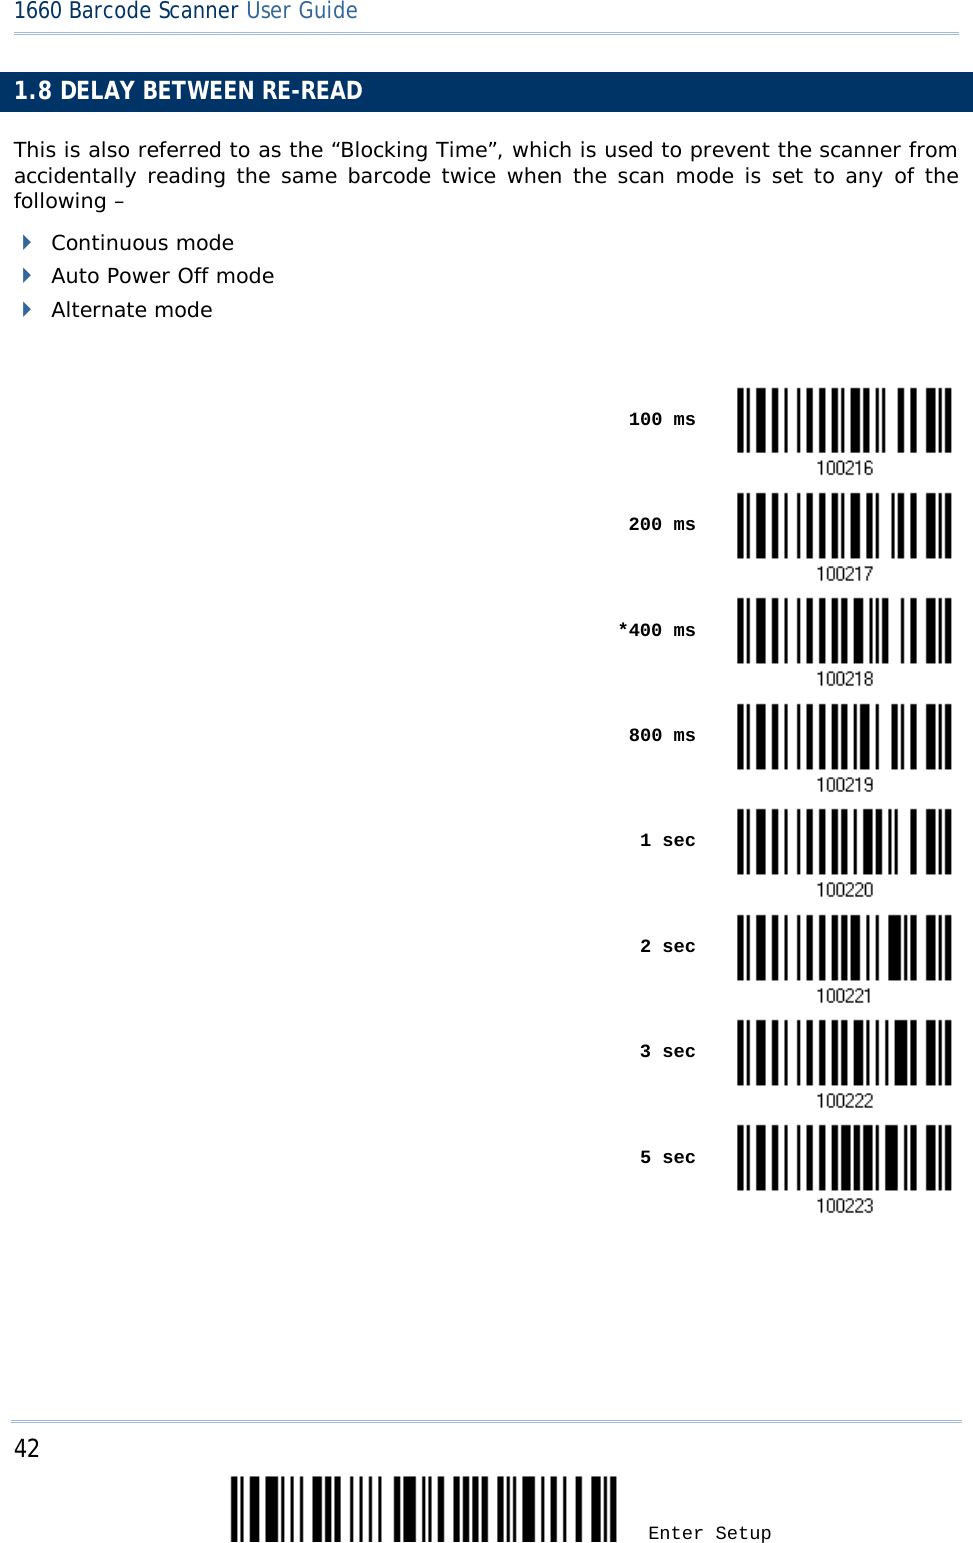 42 Enter Setup 1660 Barcode Scanner User Guide  1.8 DELAY BETWEEN RE-READ This is also referred to as the “Blocking Time”, which is used to prevent the scanner from accidentally reading the same barcode twice when the scan mode is set to any of the following –   Continuous mode  Auto Power Off mode  Alternate mode     100 ms       200 ms     *400 ms     800 ms     1 sec     2 sec       3 sec     5 sec     